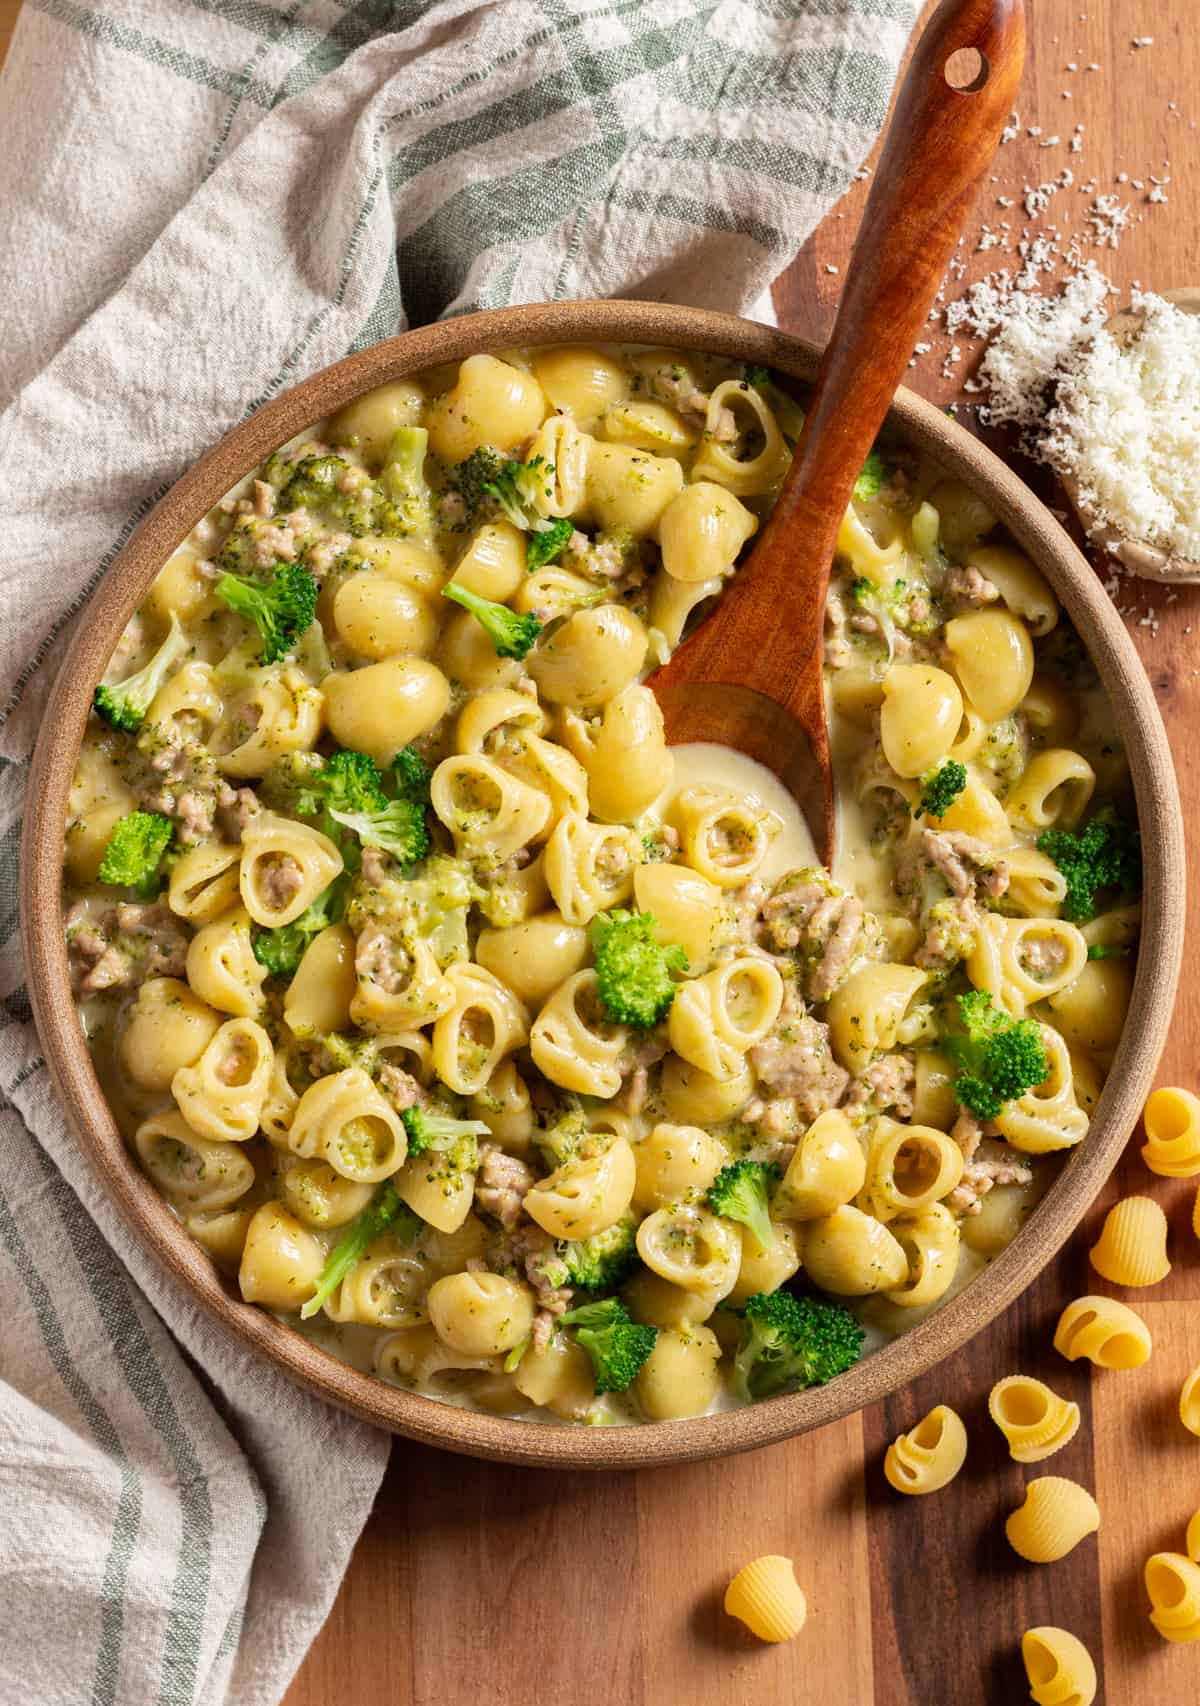 A simple ground turkey pasta recipe with broccoli and cheddar cheese, in a brown bowl with a wooden spoon, sitting on a green and cream colored dish towel.